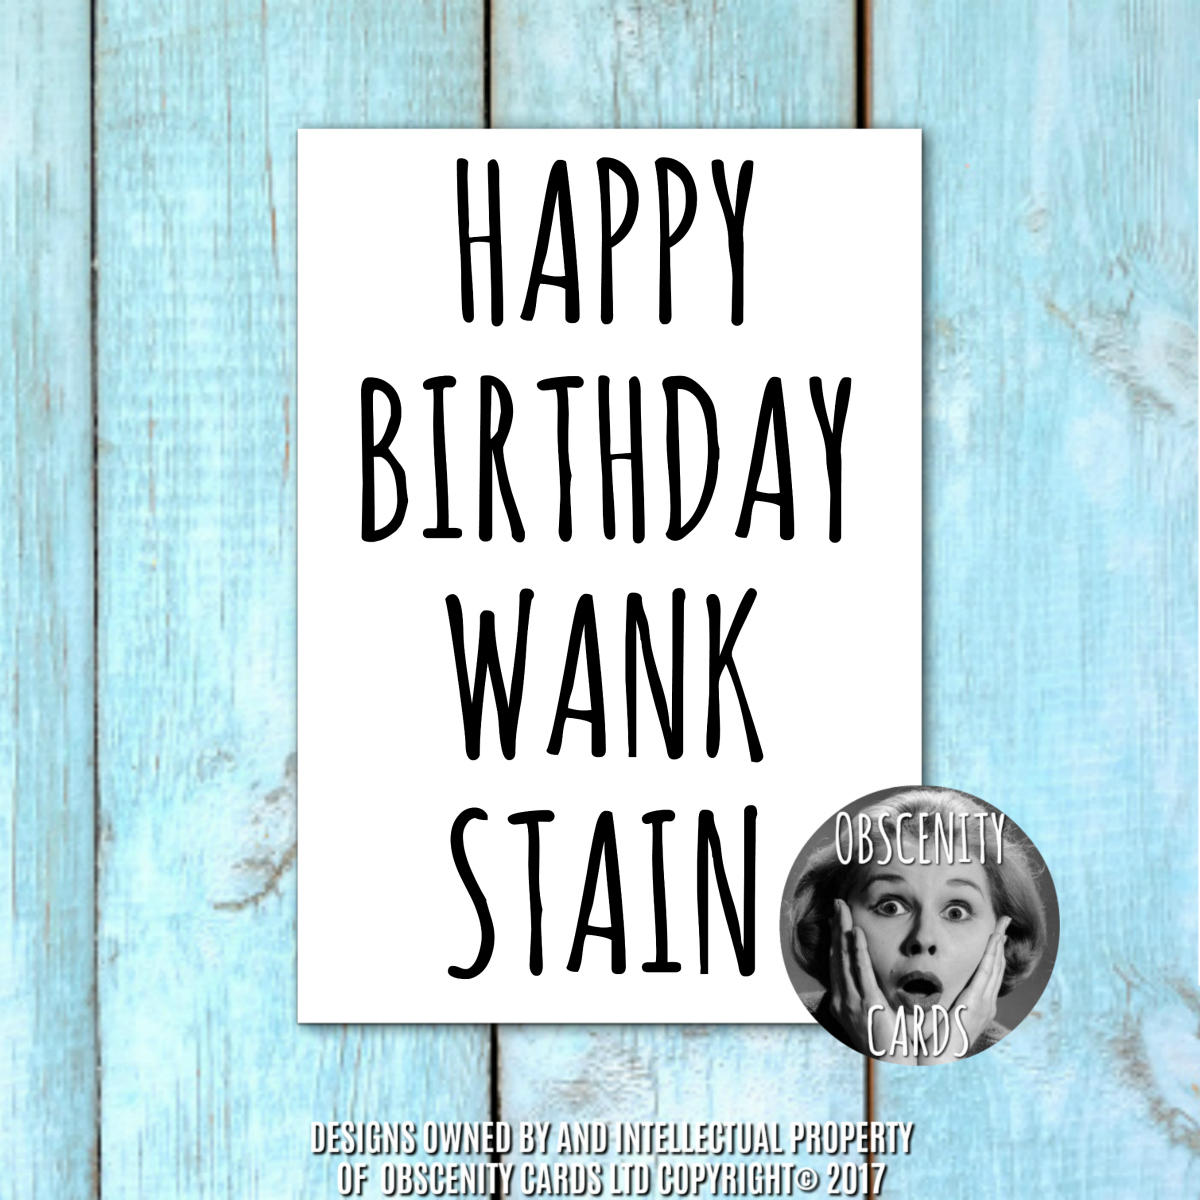 Funny WANK STAIN card. Obscenity cards. Obscene Funny Cards, Pens, Party Hats, Key rings, Magnets, Wine Bags, Lighters & Loads More!